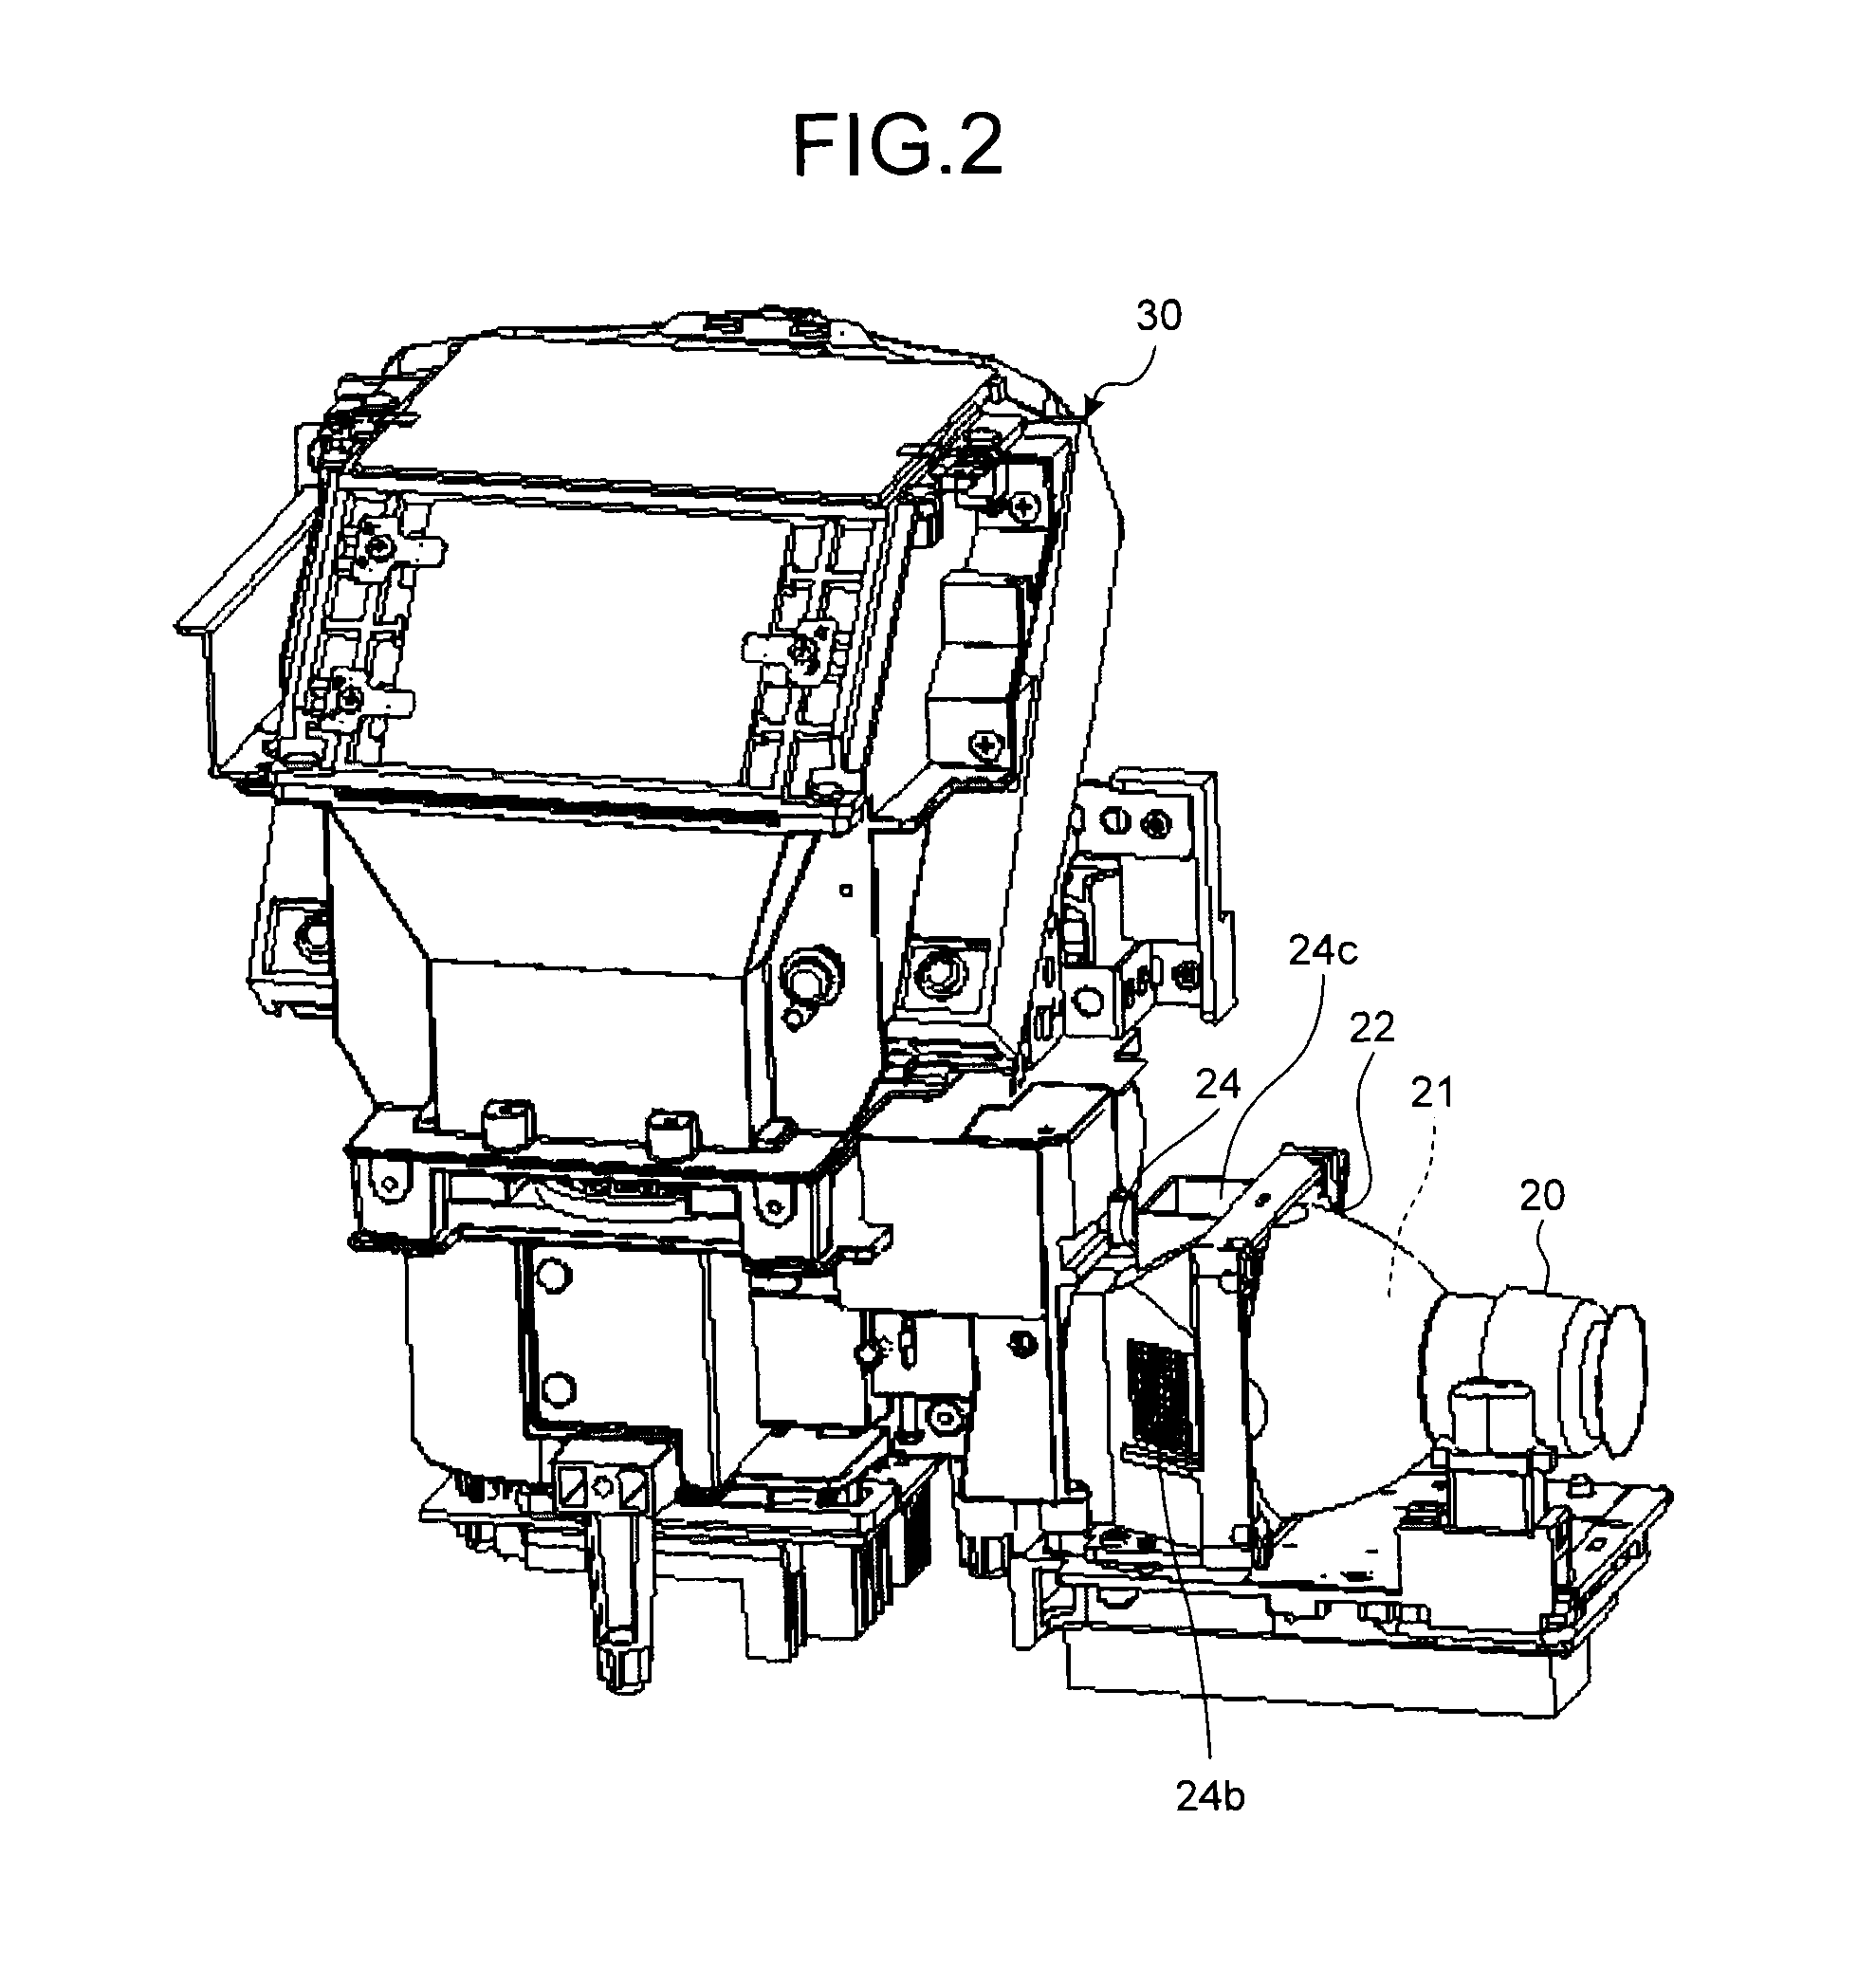 Switch mechanism and electronic device